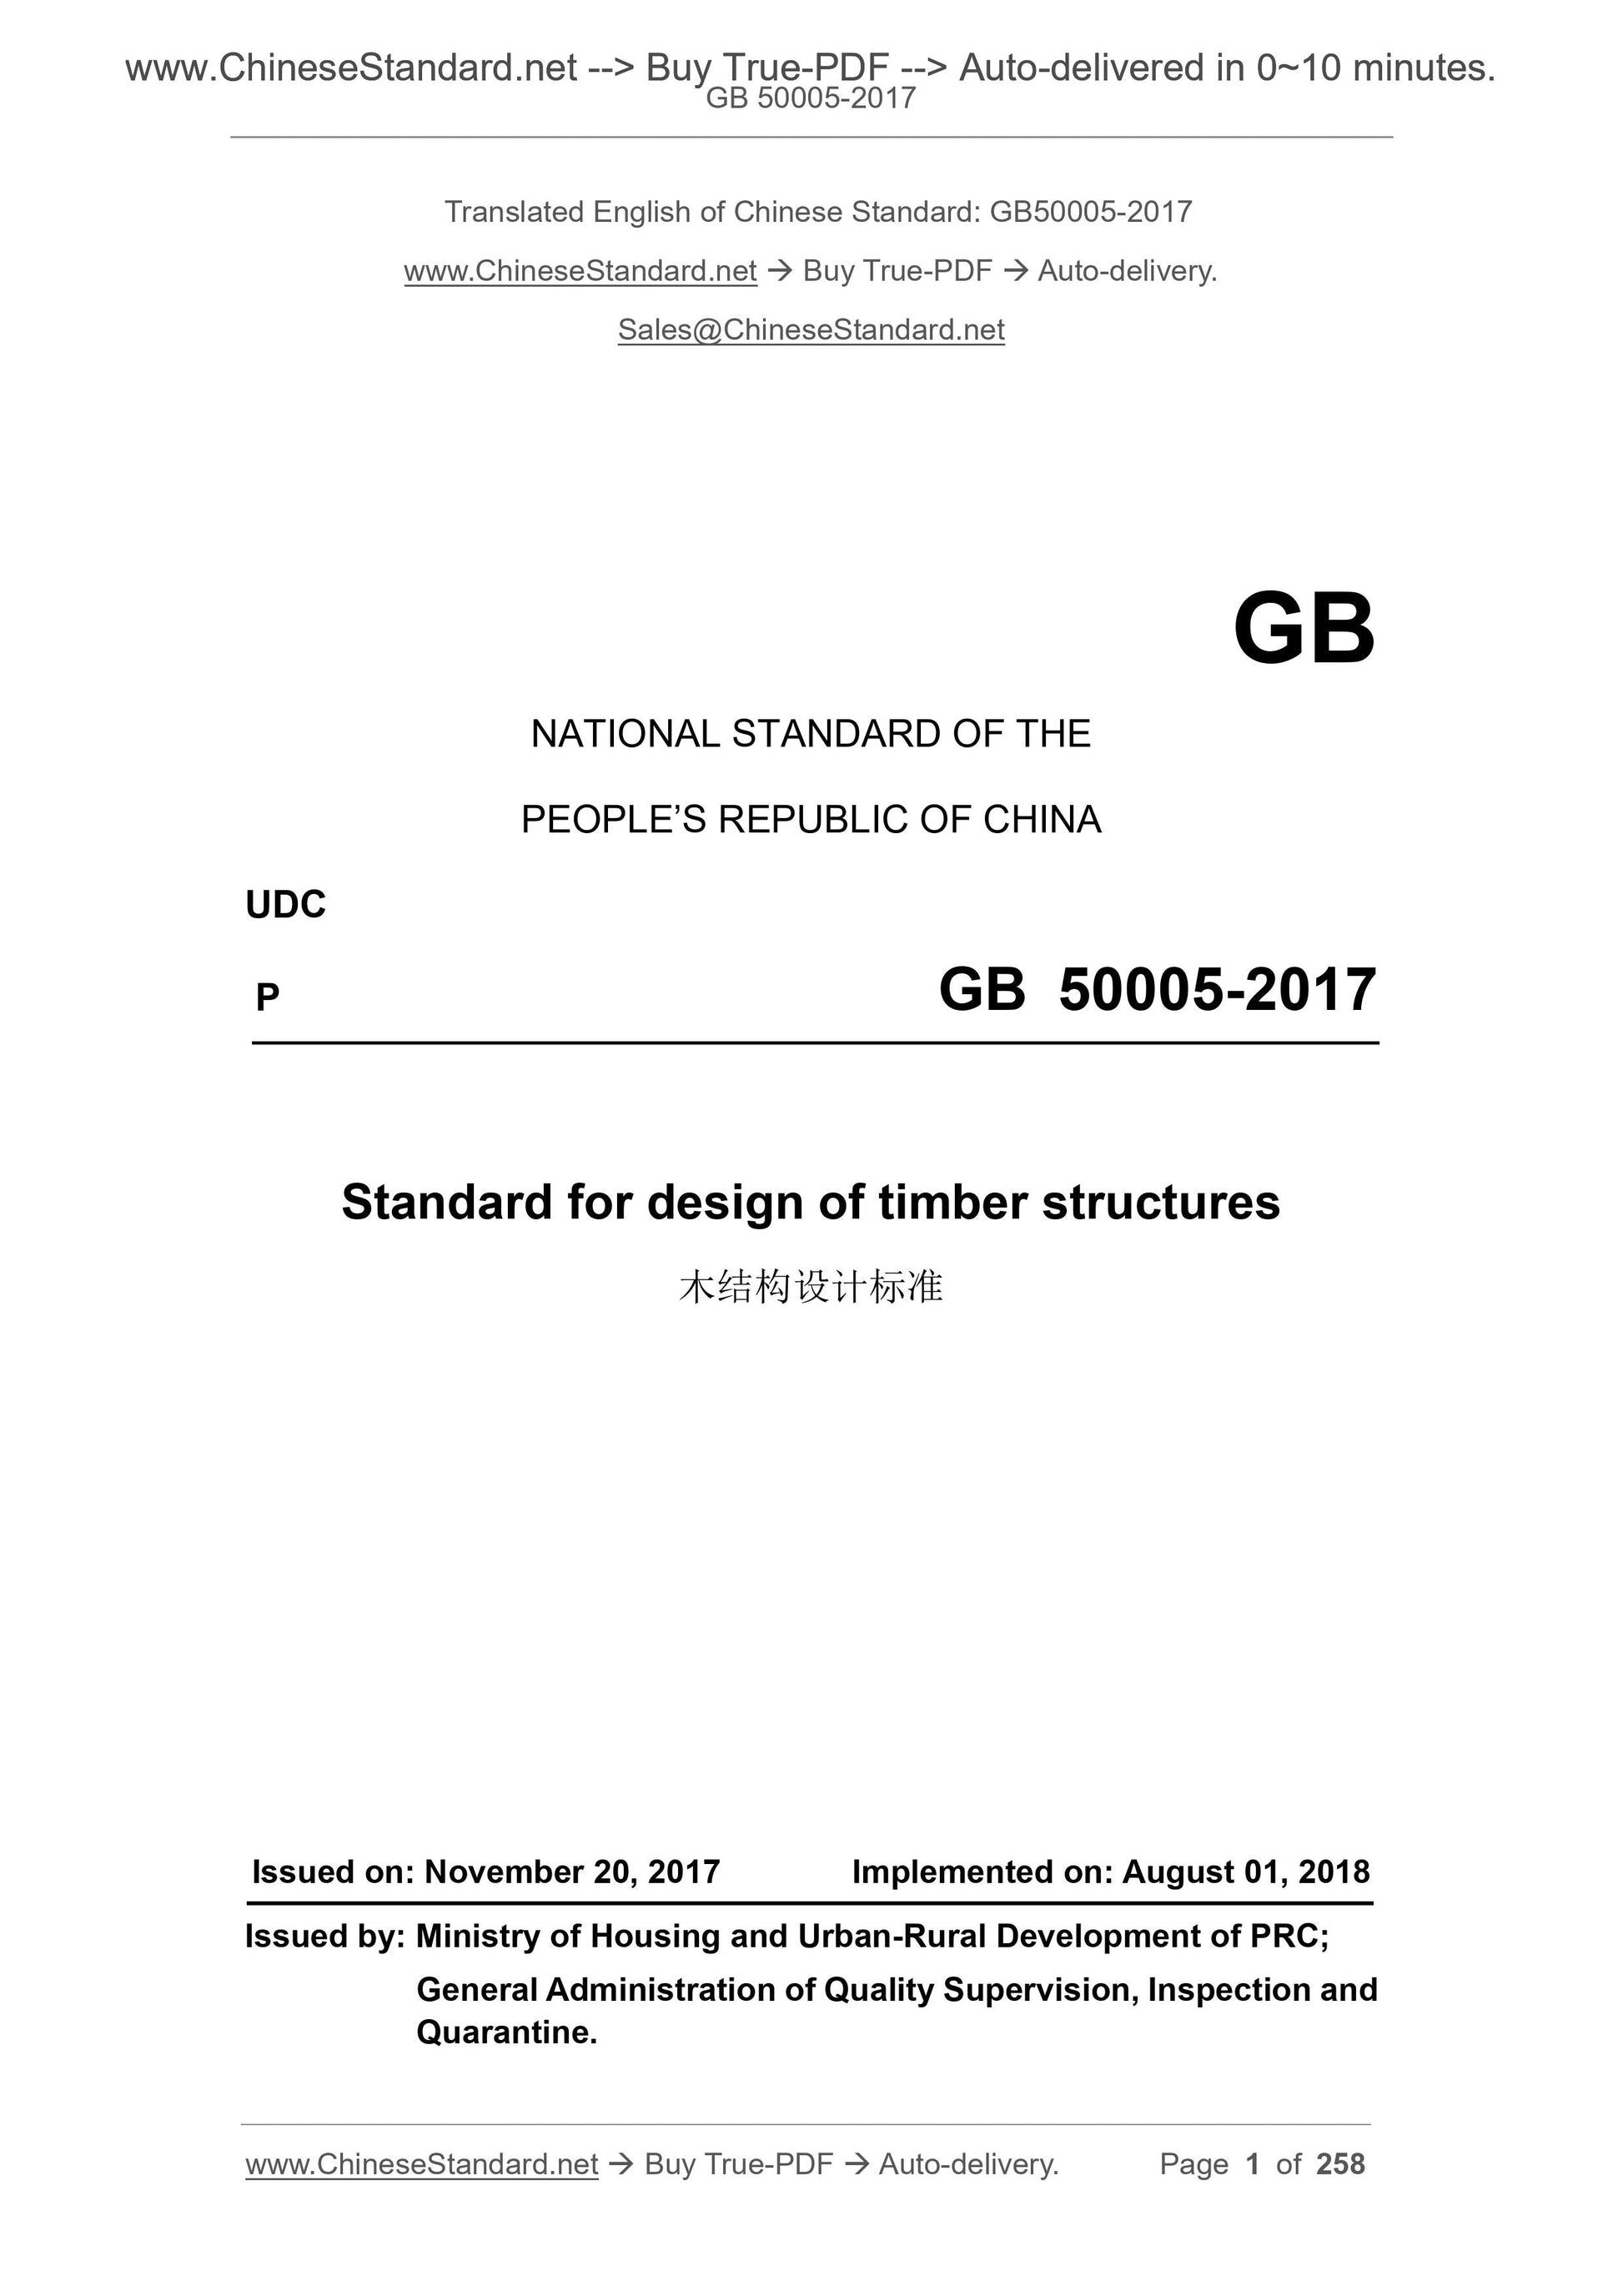 GB 50005-2017 Page 1